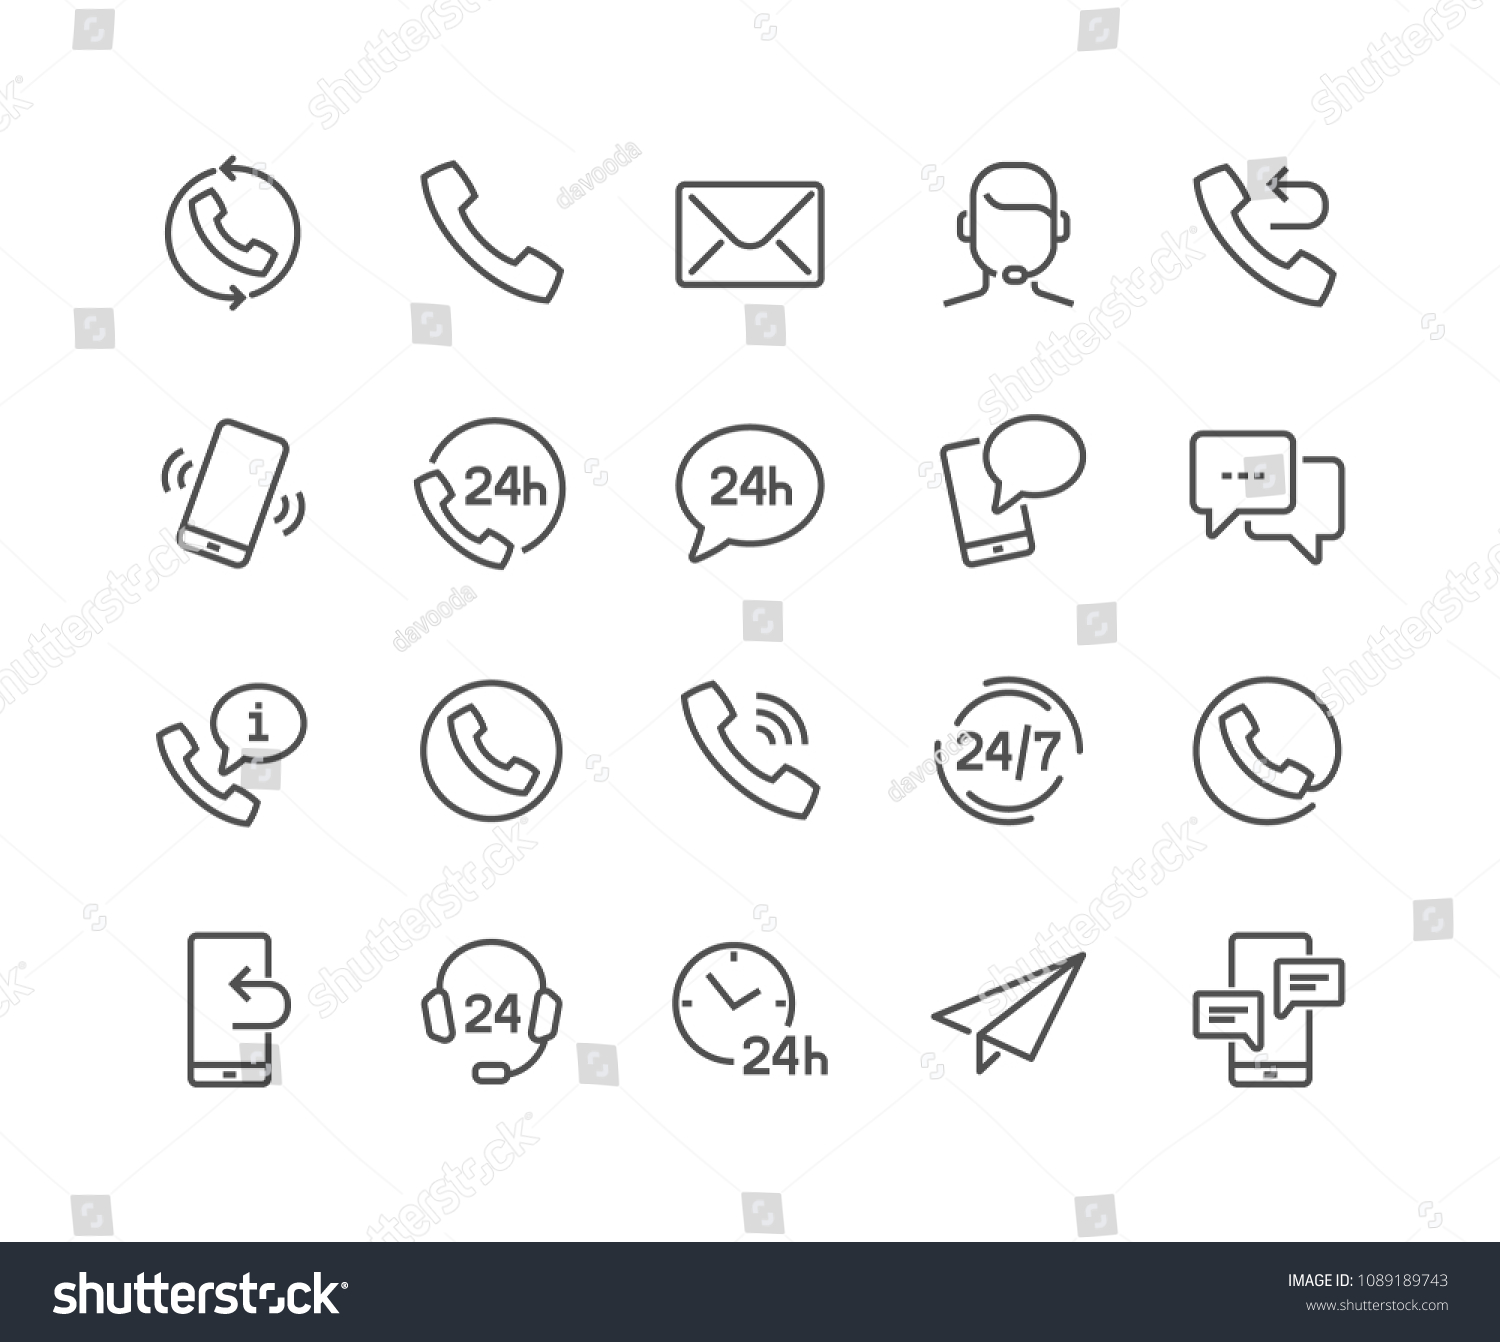 Simple Set of Processing Related Vector Line Icons. Contains such Icons as Support, Chat, Callback and more.
Editable Stroke. 48x48 Pixel Perfect. #1089189743